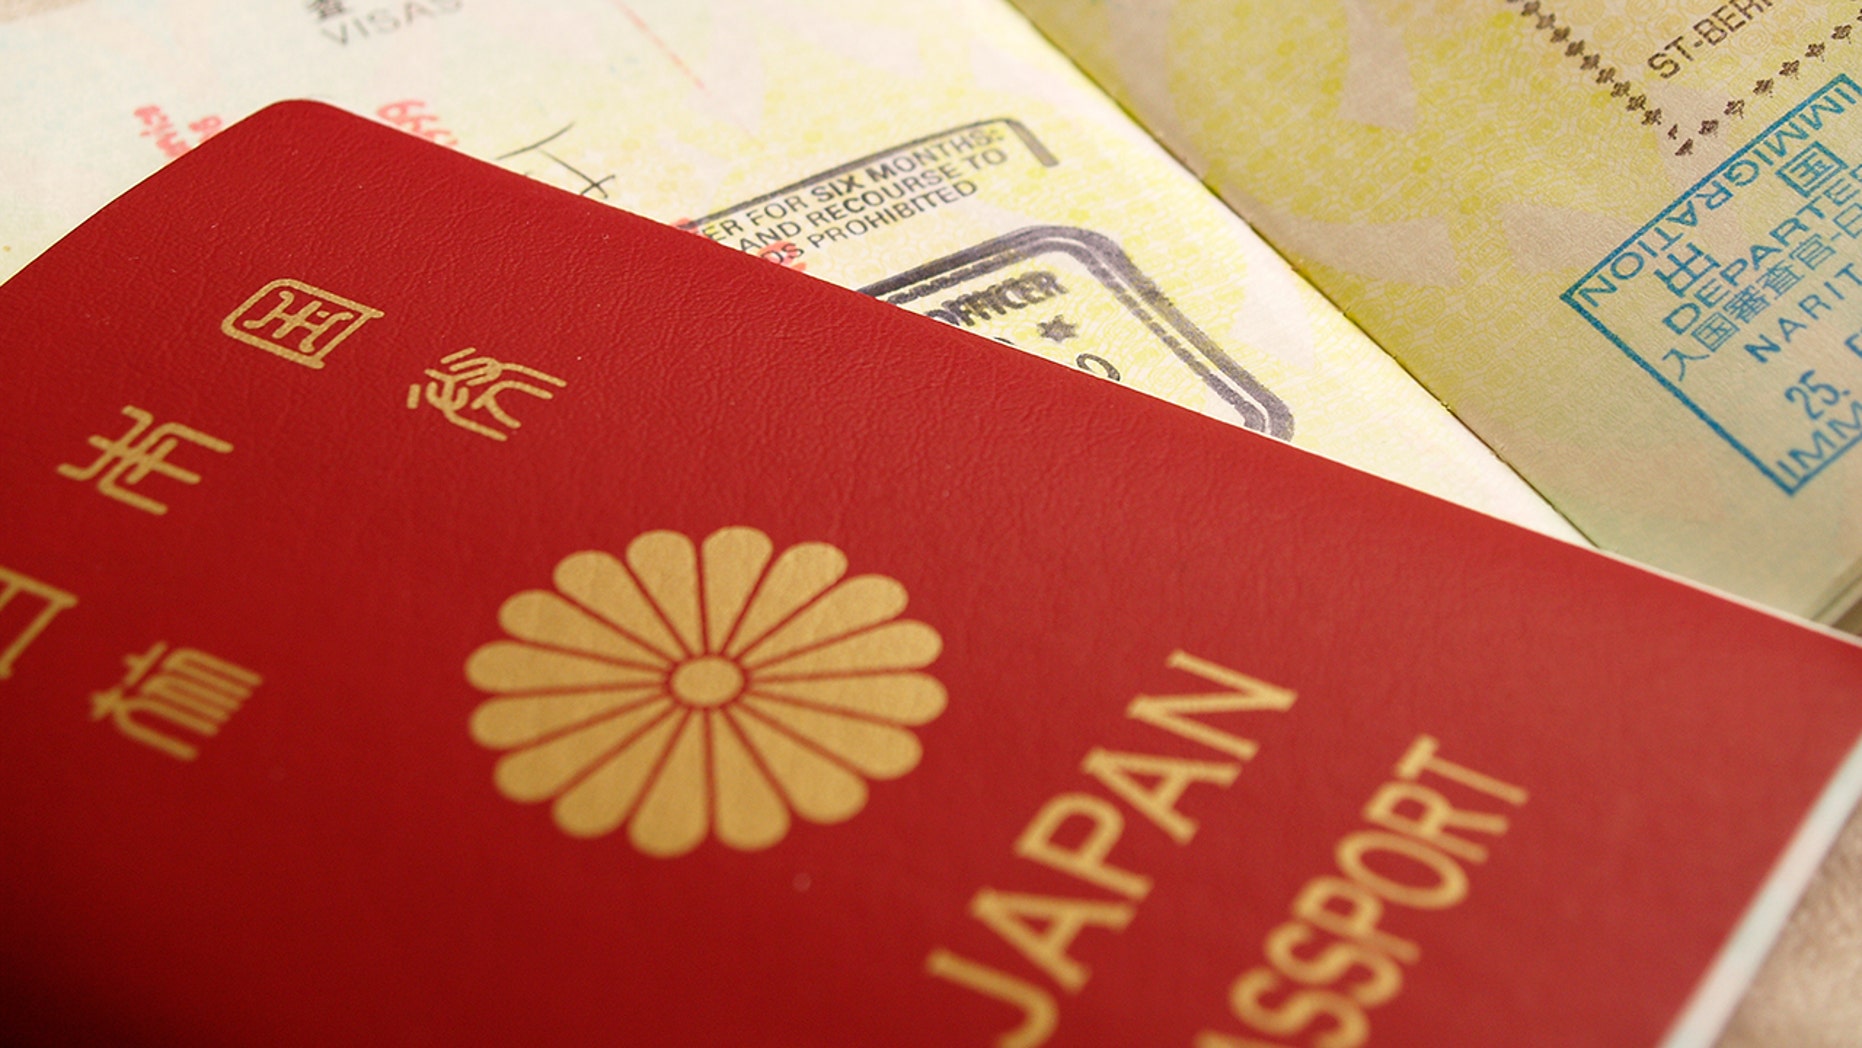 countries you can visit with japanese passport